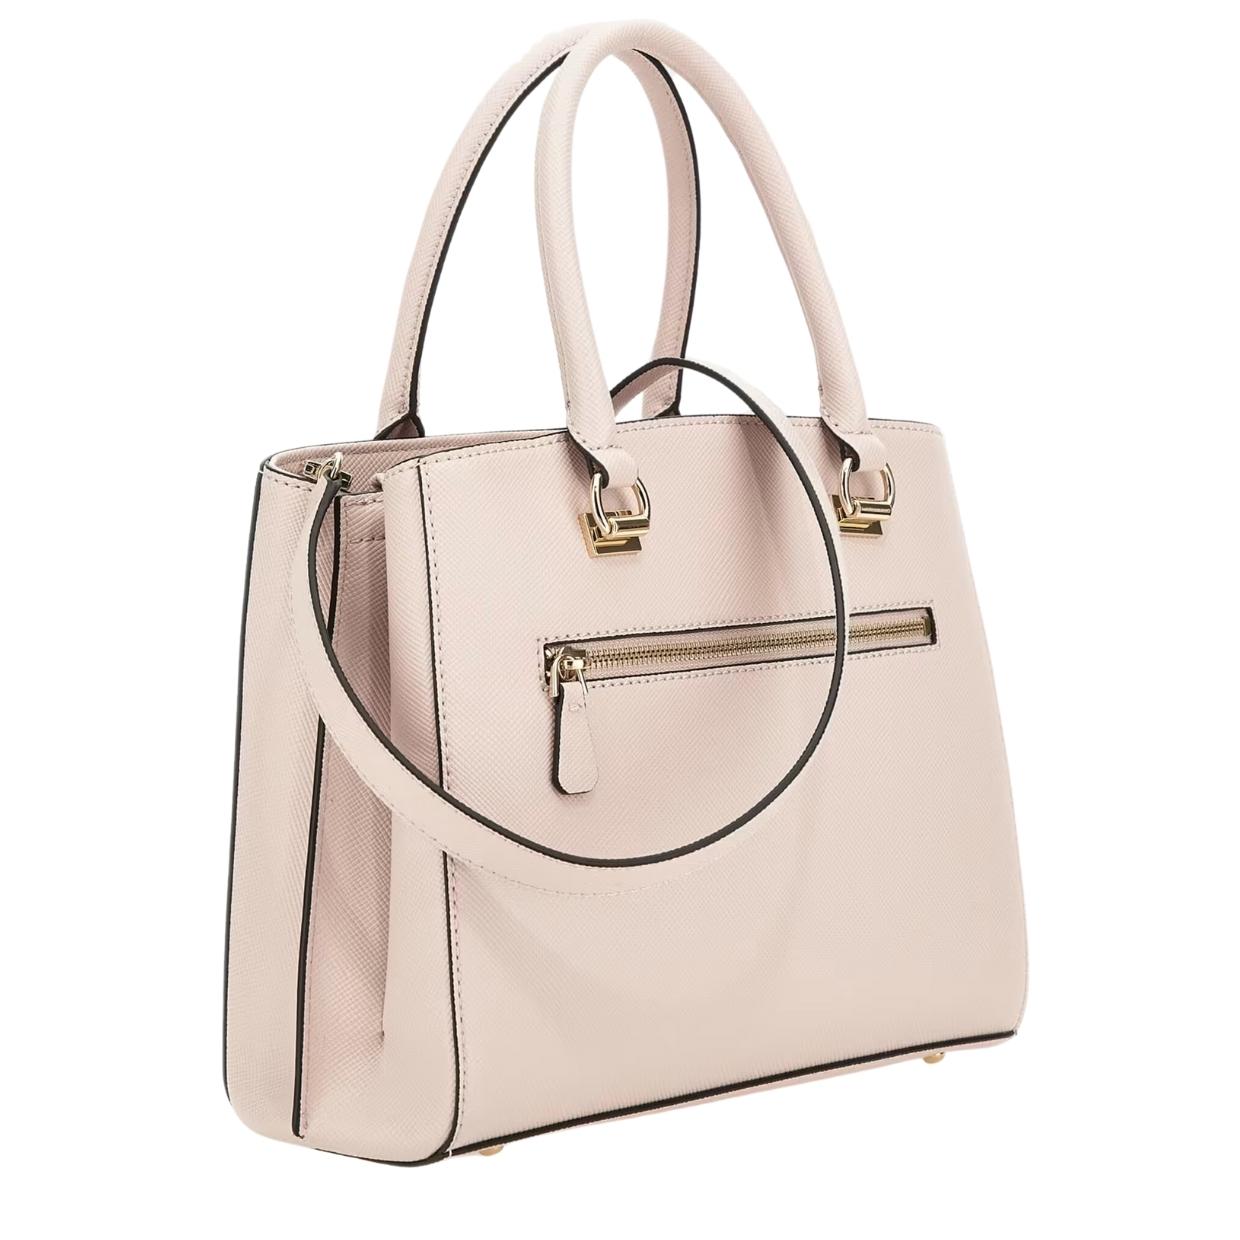 Guess Noelle Triangle Logo Light Rose Tote Bag